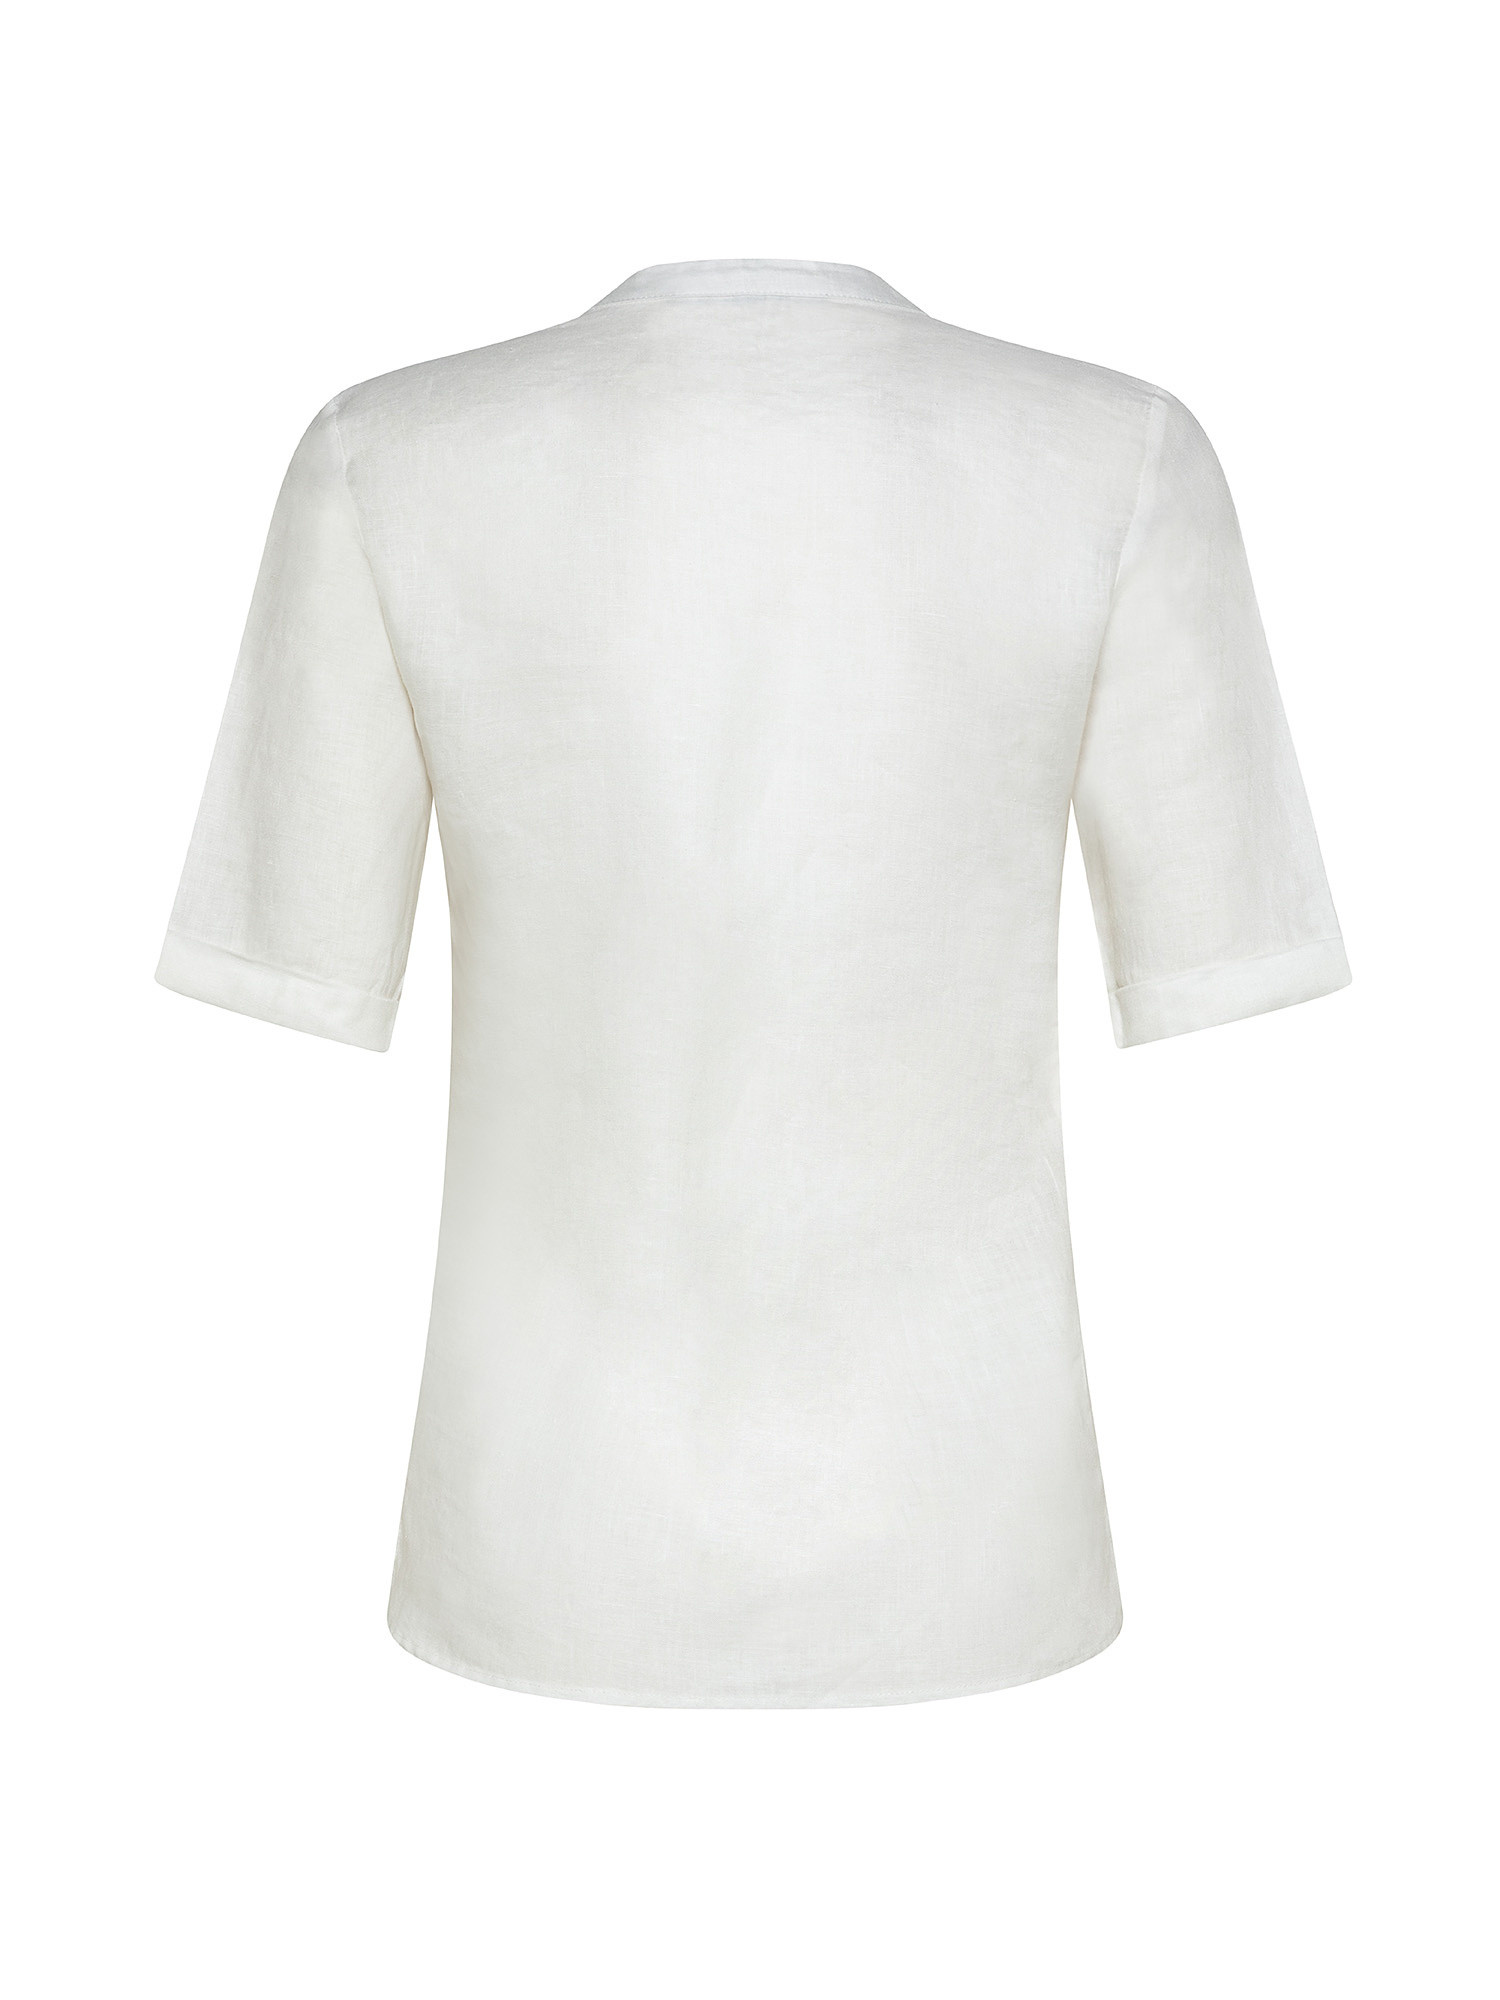 Pure linen shirt with pleats, White, large image number 1